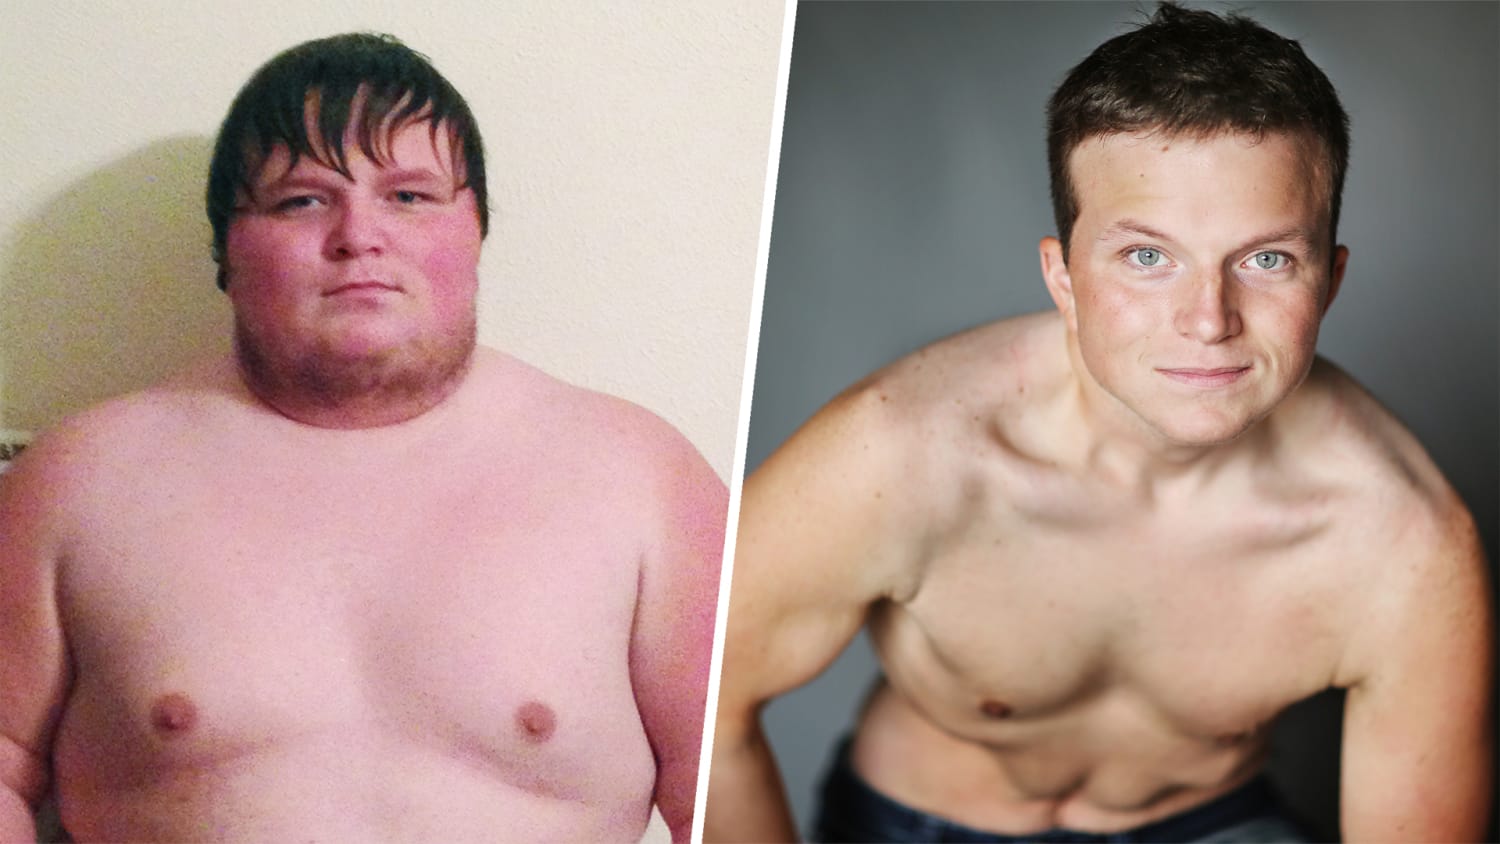 Man loses 176 pounds in less than a year, thanks to 3 easy steps.